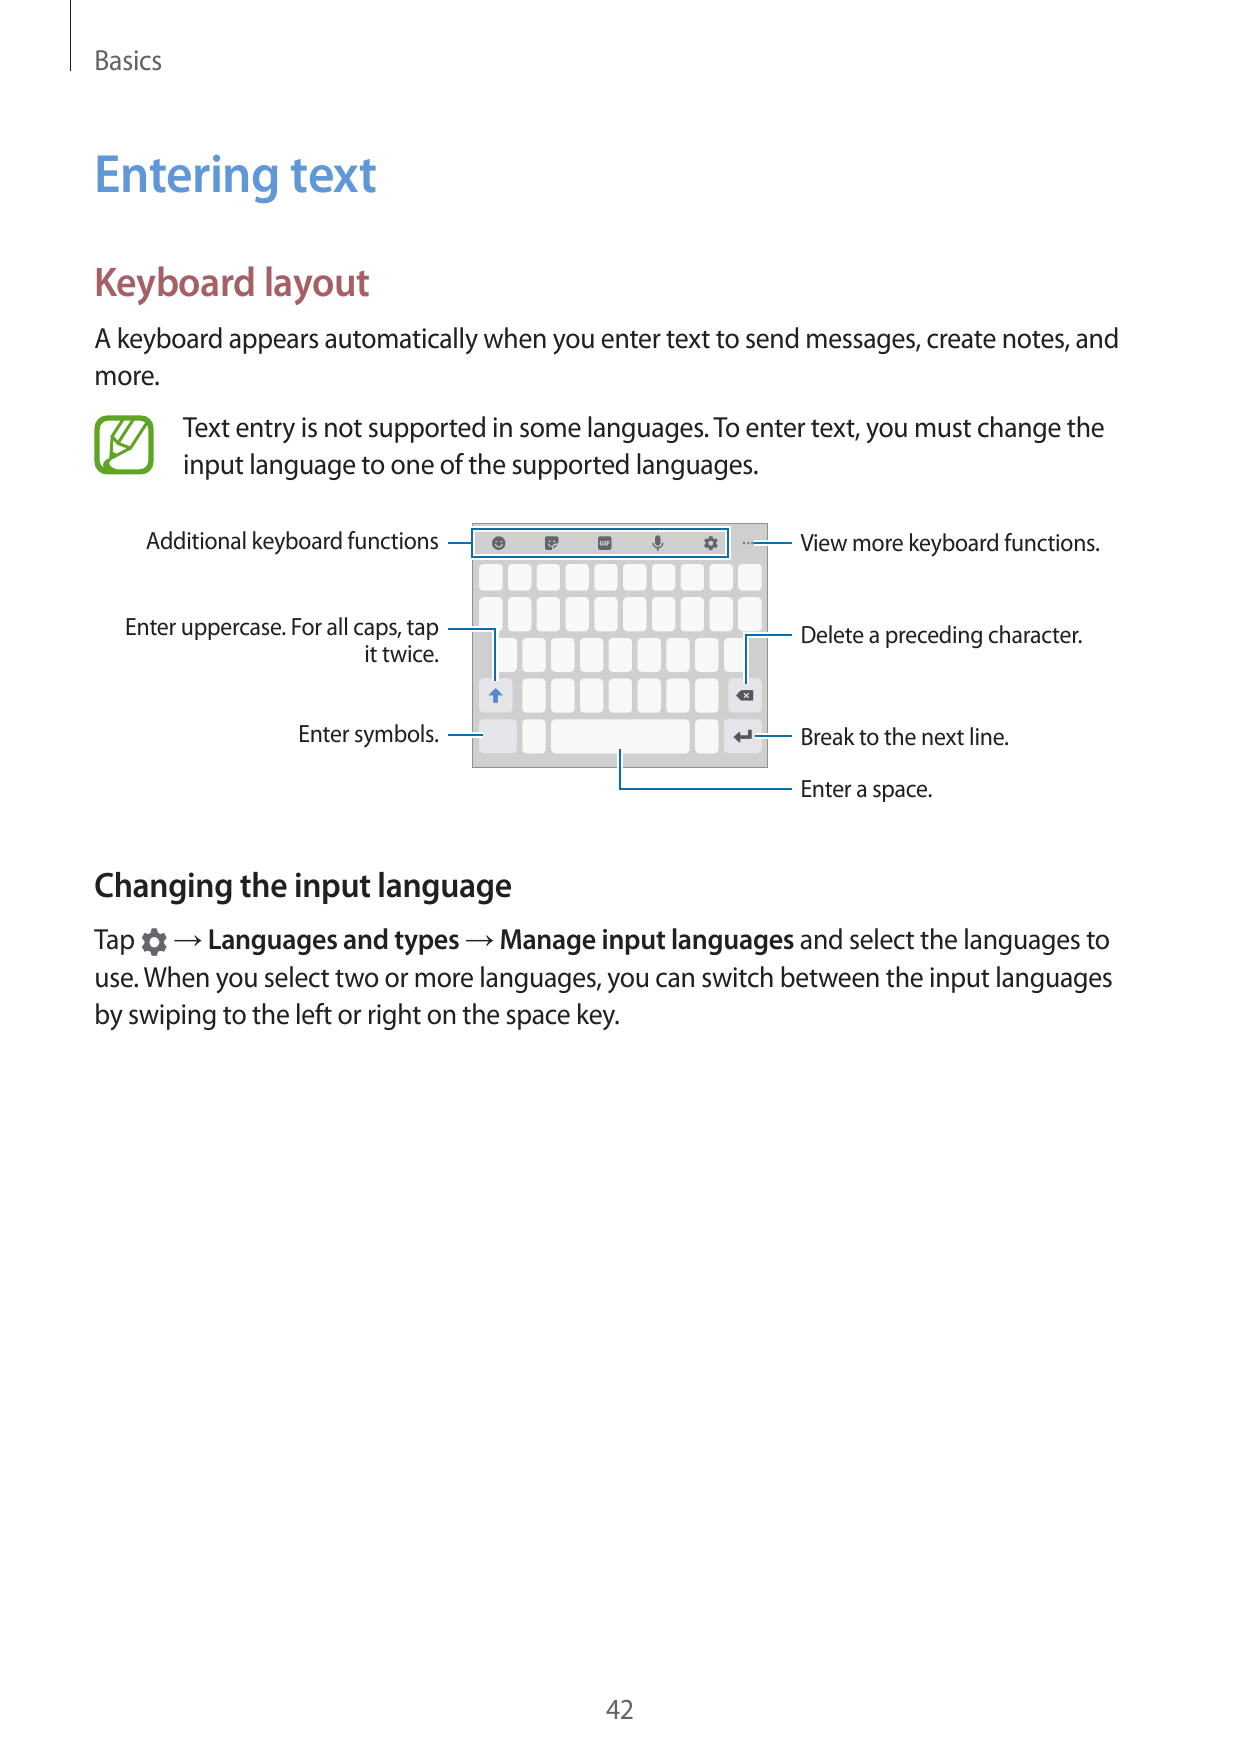 BasicsEntering textKeyboard layoutA keyboard appears automatically when you enter text to send messages, create notes, andmore.T